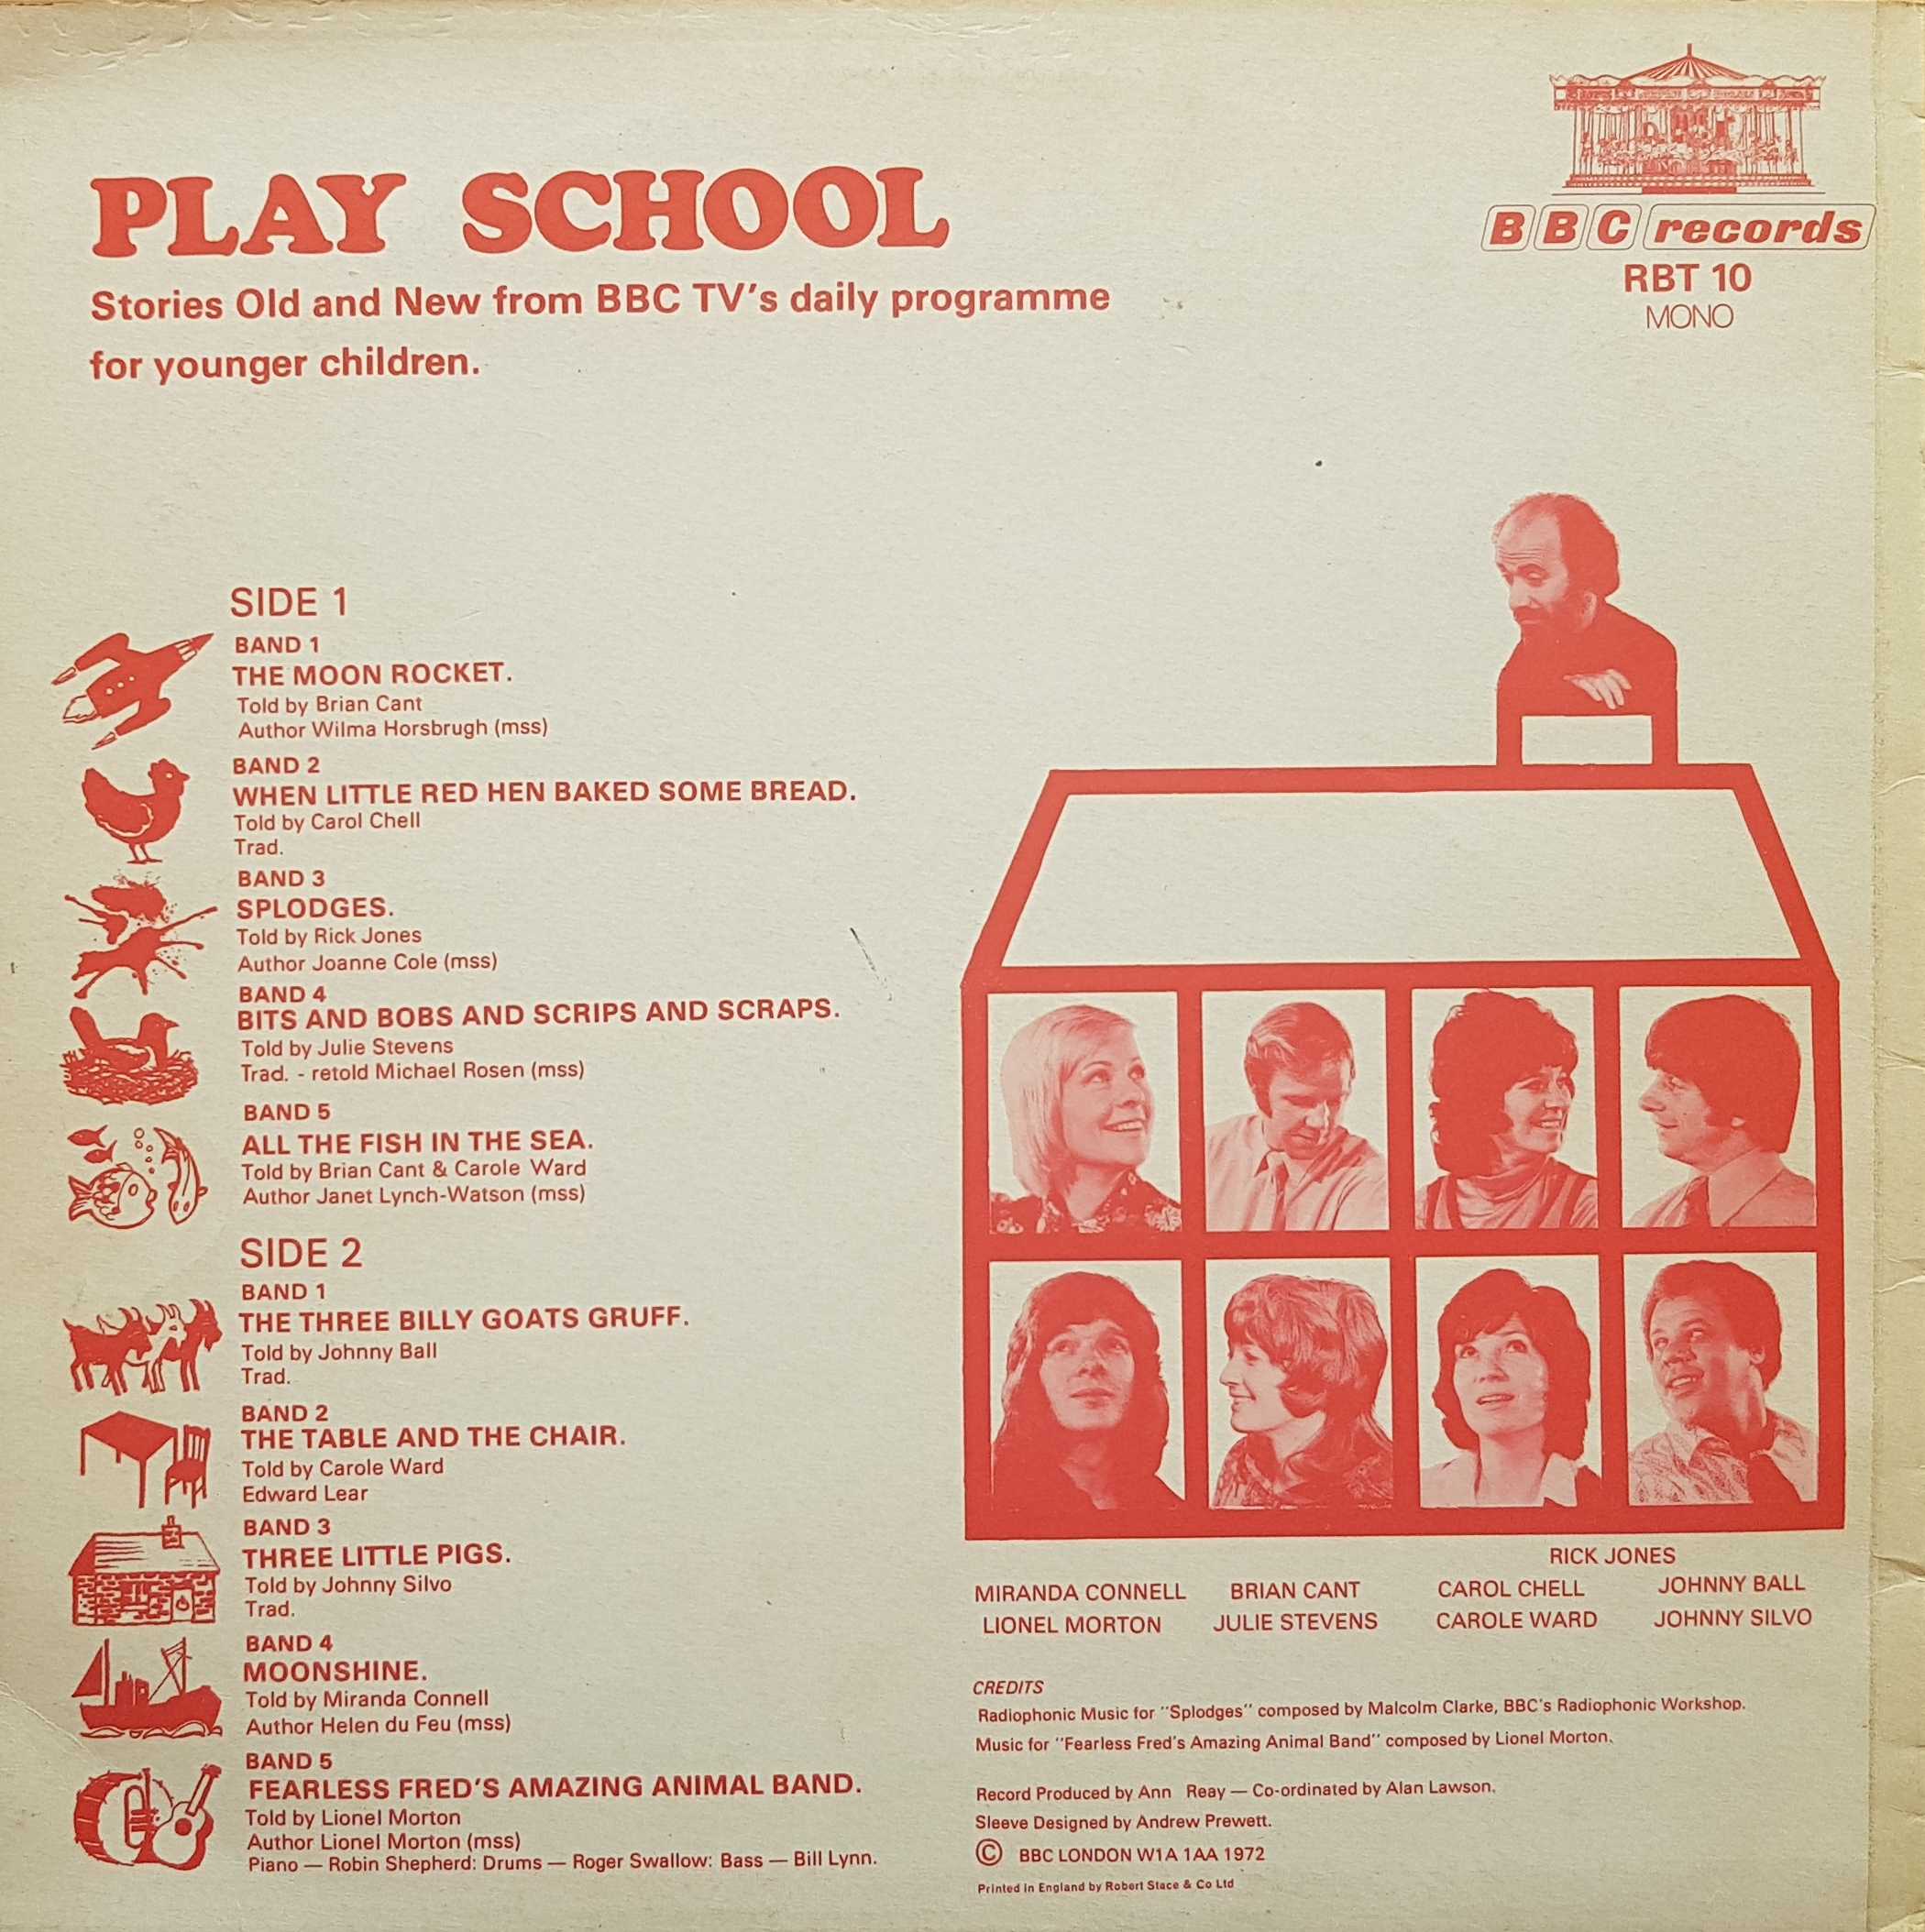 Picture of RBT 10 Playschool by artist Various from the BBC records and Tapes library